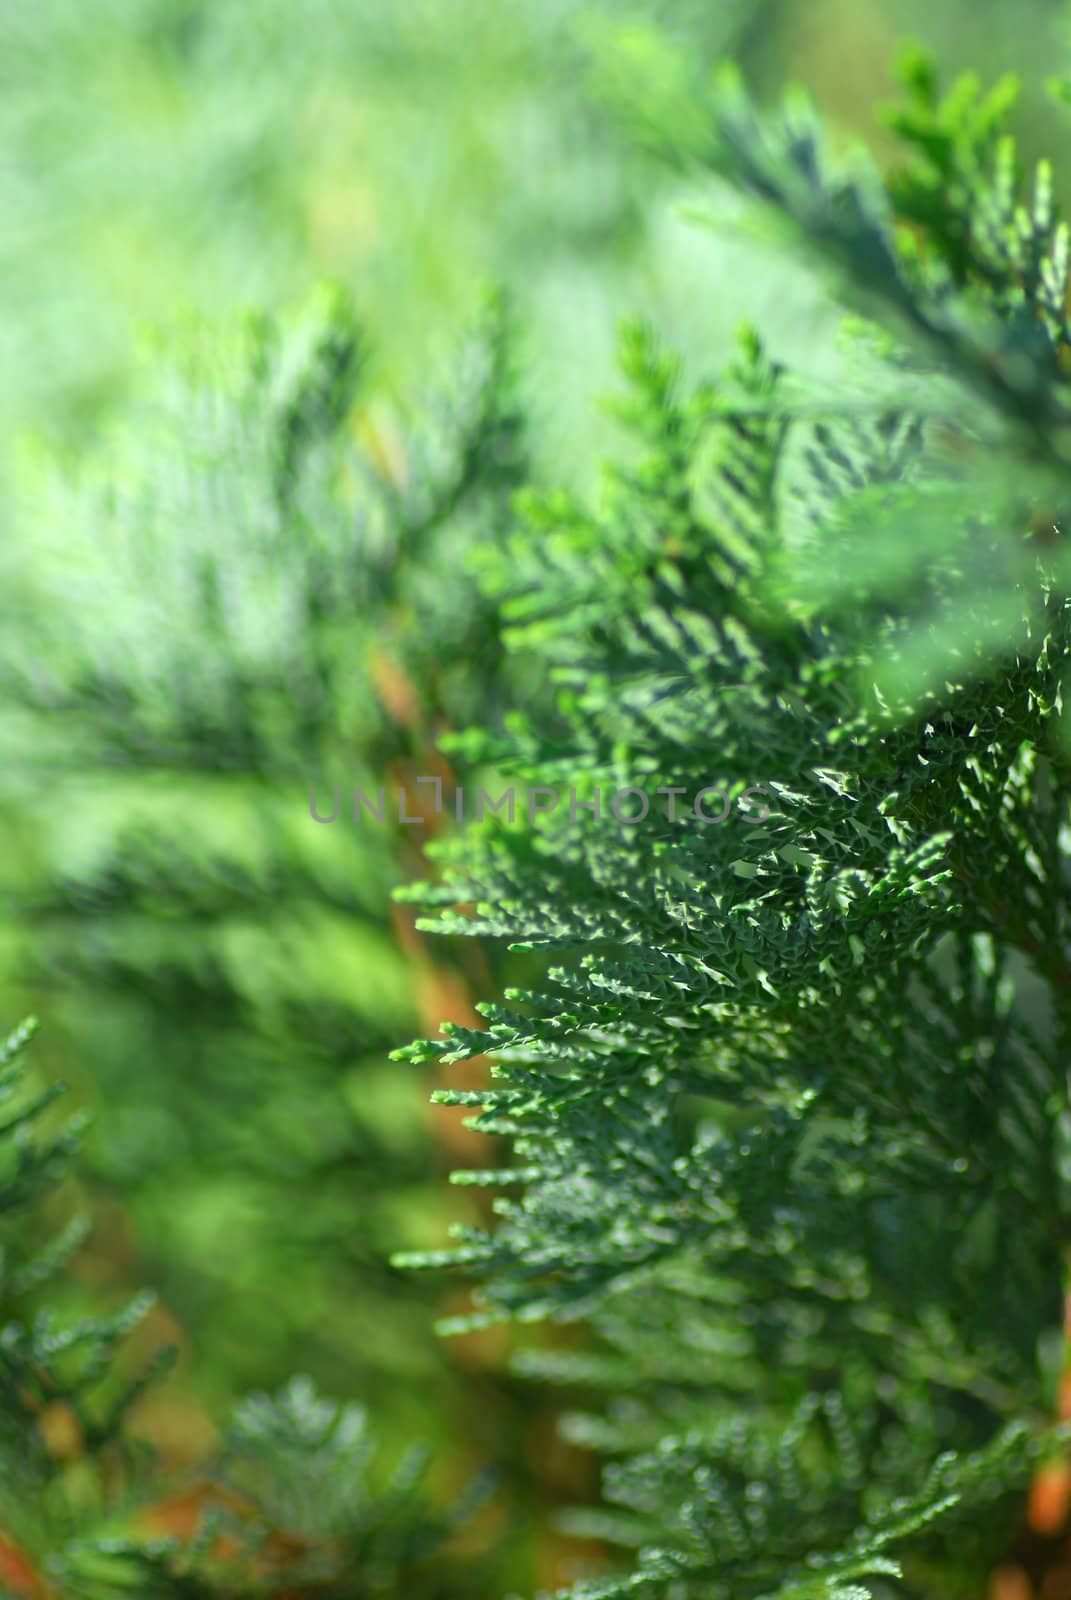 Natural garden background of the thuja tree partly out of focus.